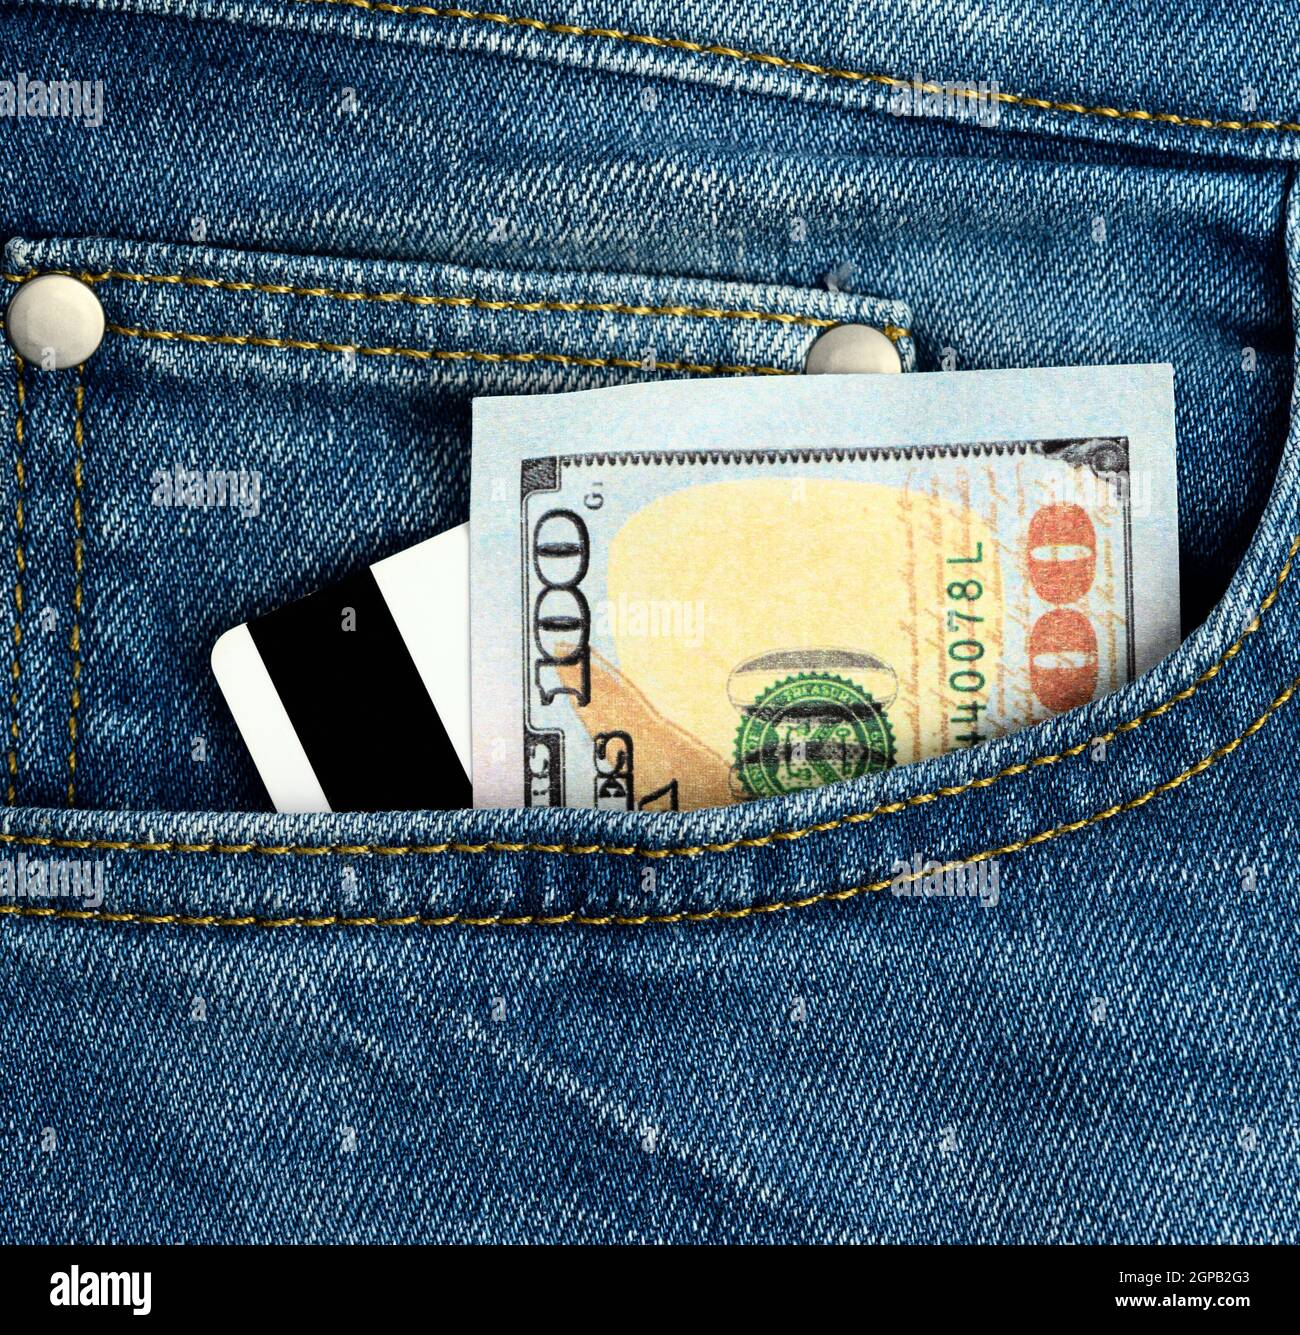 paper american dollars and plastic bank card with magnetic stripe in the pocket of blue jeans, close up Stock Photo